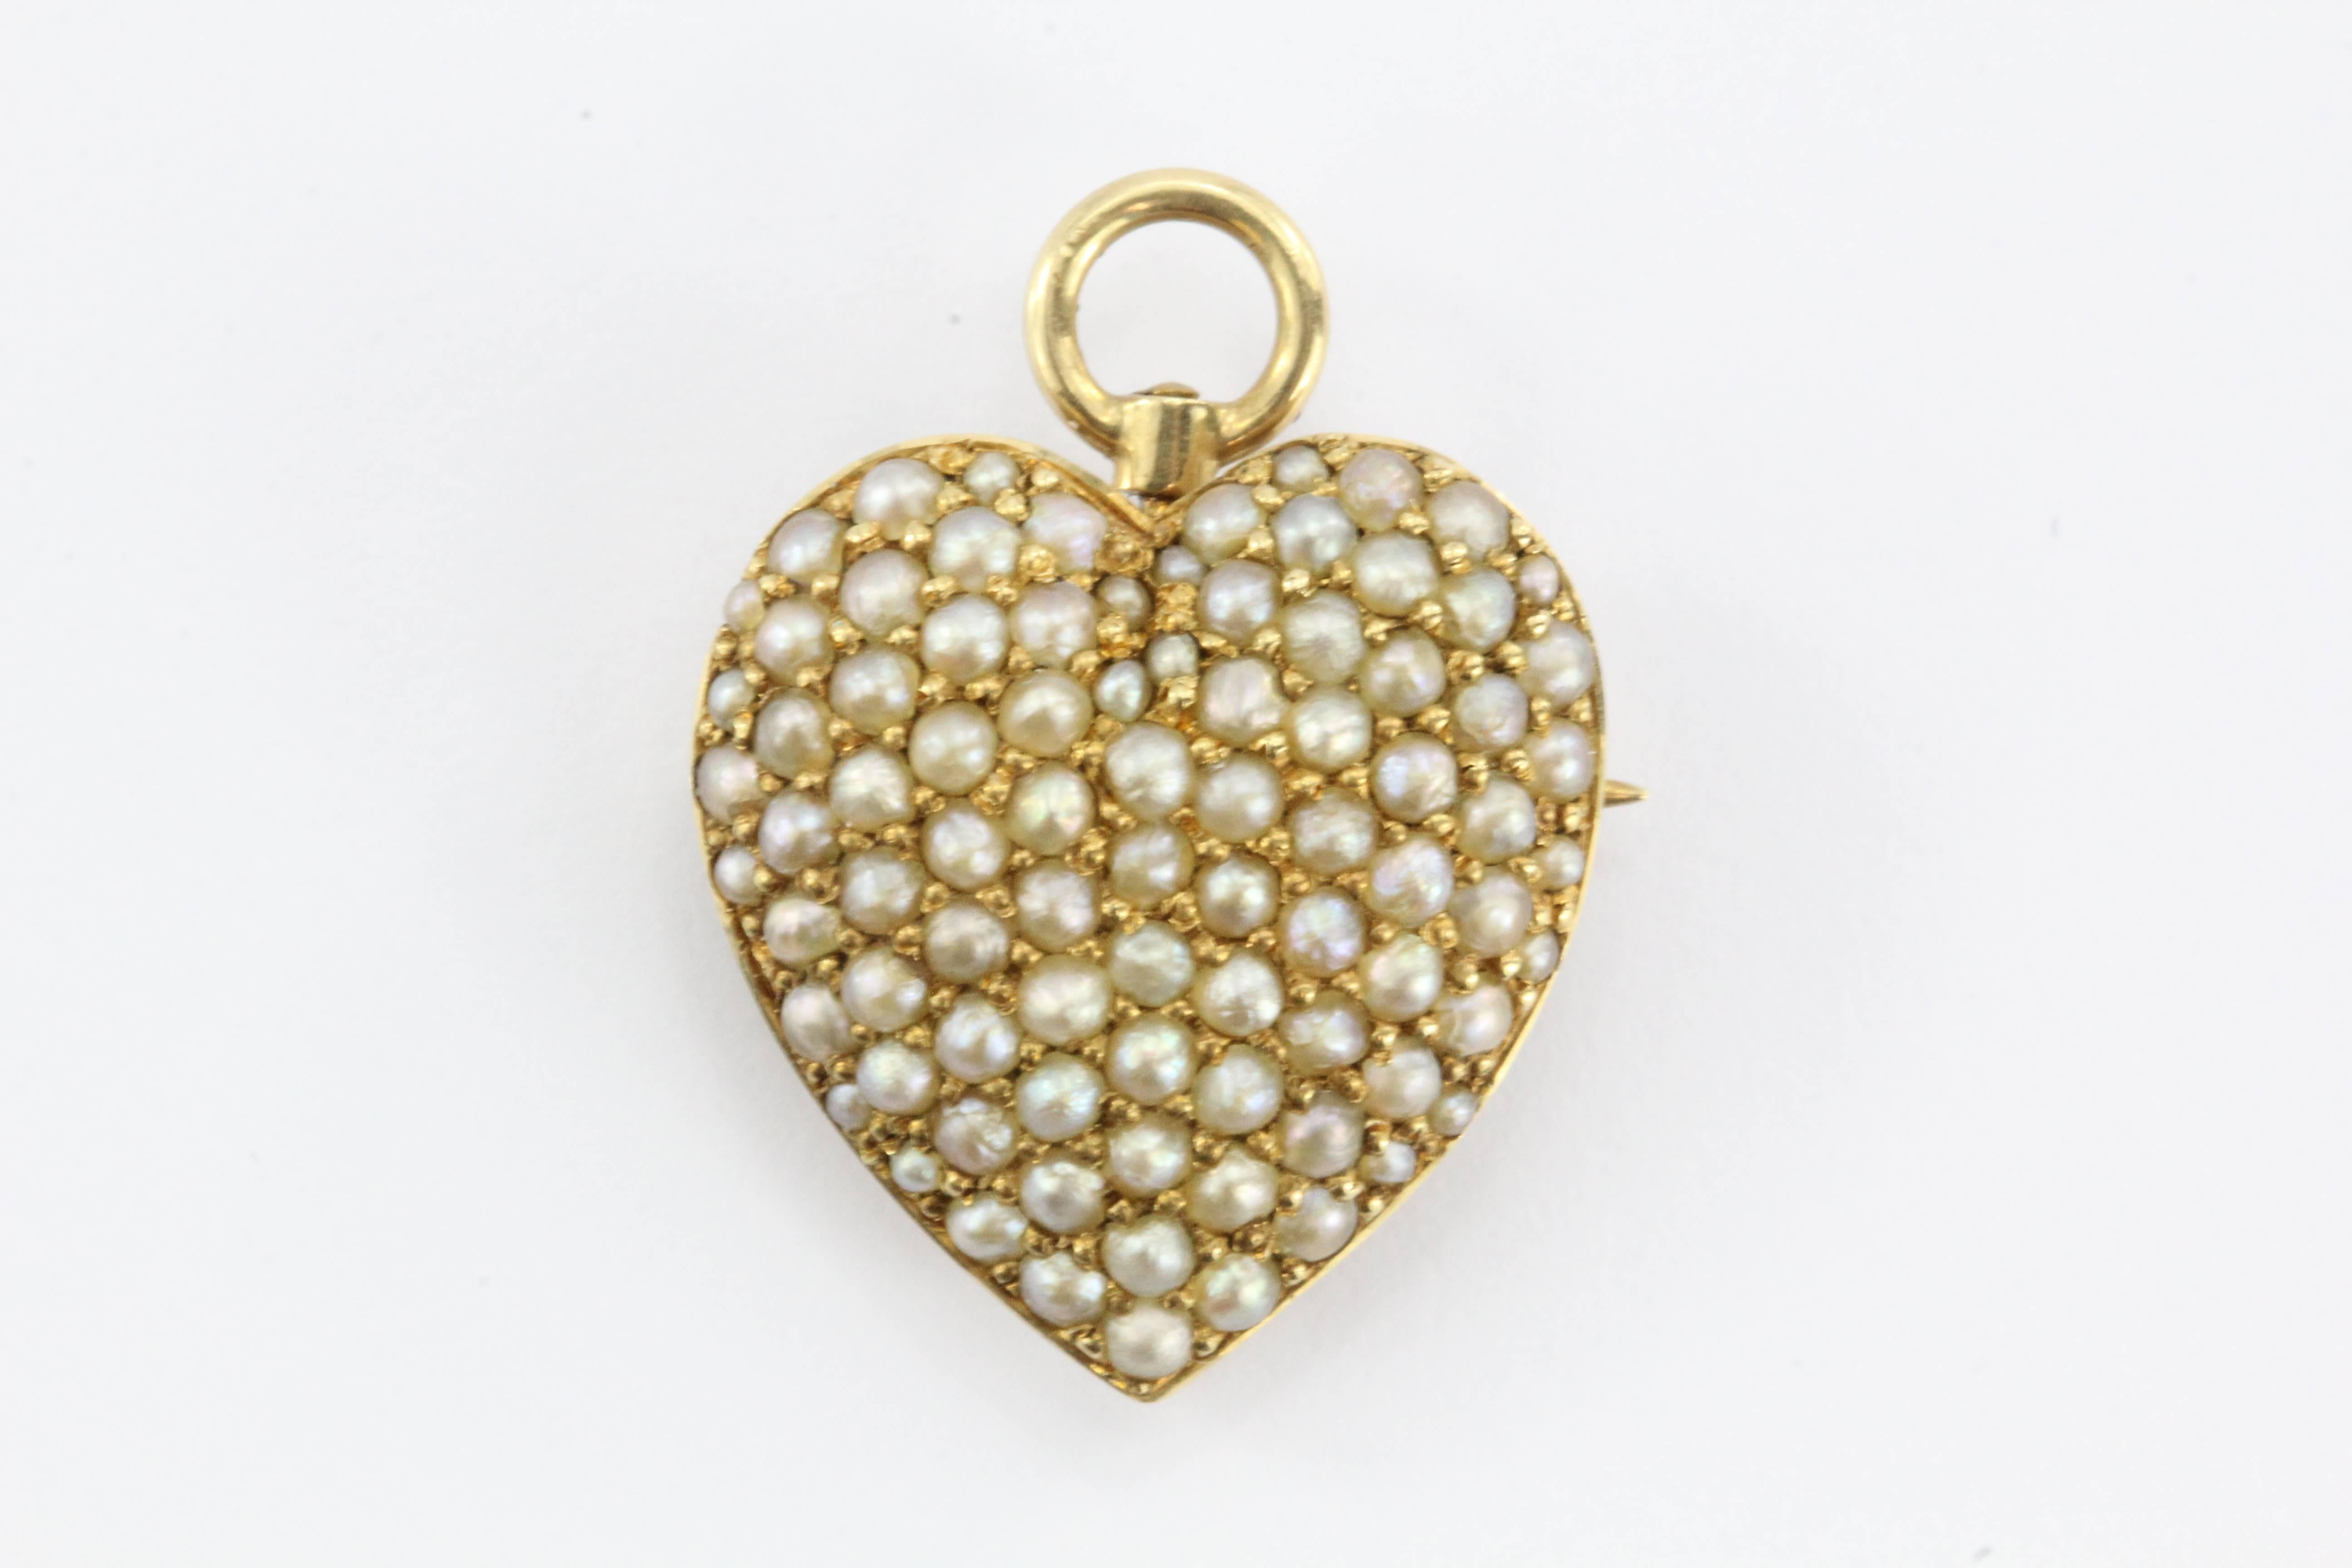 Antique Art Nouveau 14K Gold & Seed Pearl Studded Heart Pendant, Pin Hallmarked. The piece is in amazing antique estate condition. It still has all of its original seed pearls with no replacements. It also has all its original parts. It can be worn